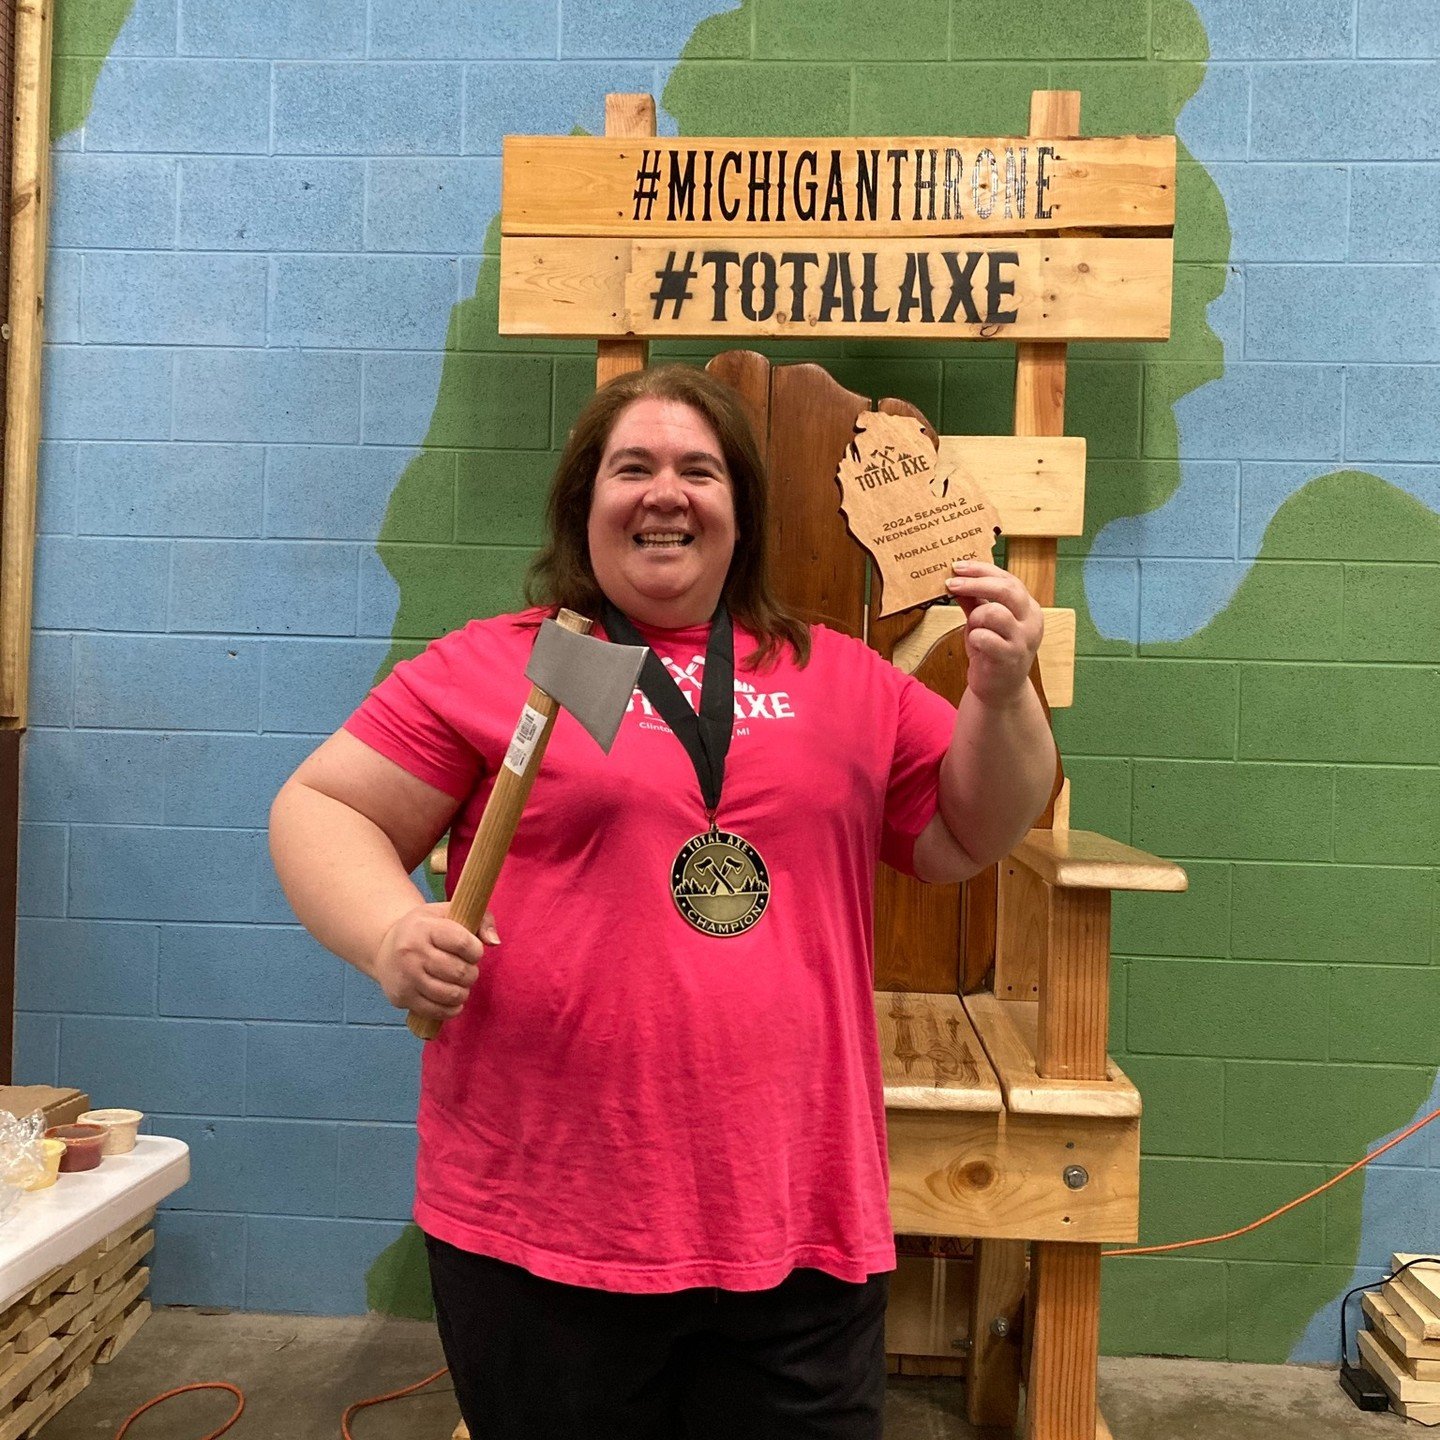 At my age, I never thought I'd win any kind of sports award. I write, I am not a sporty kind of gal. But what a night I had. 

Yesterday, I was given the Morale Award for my women's axe-throwing league, Total Axe Throwing, which was enough for me.

T